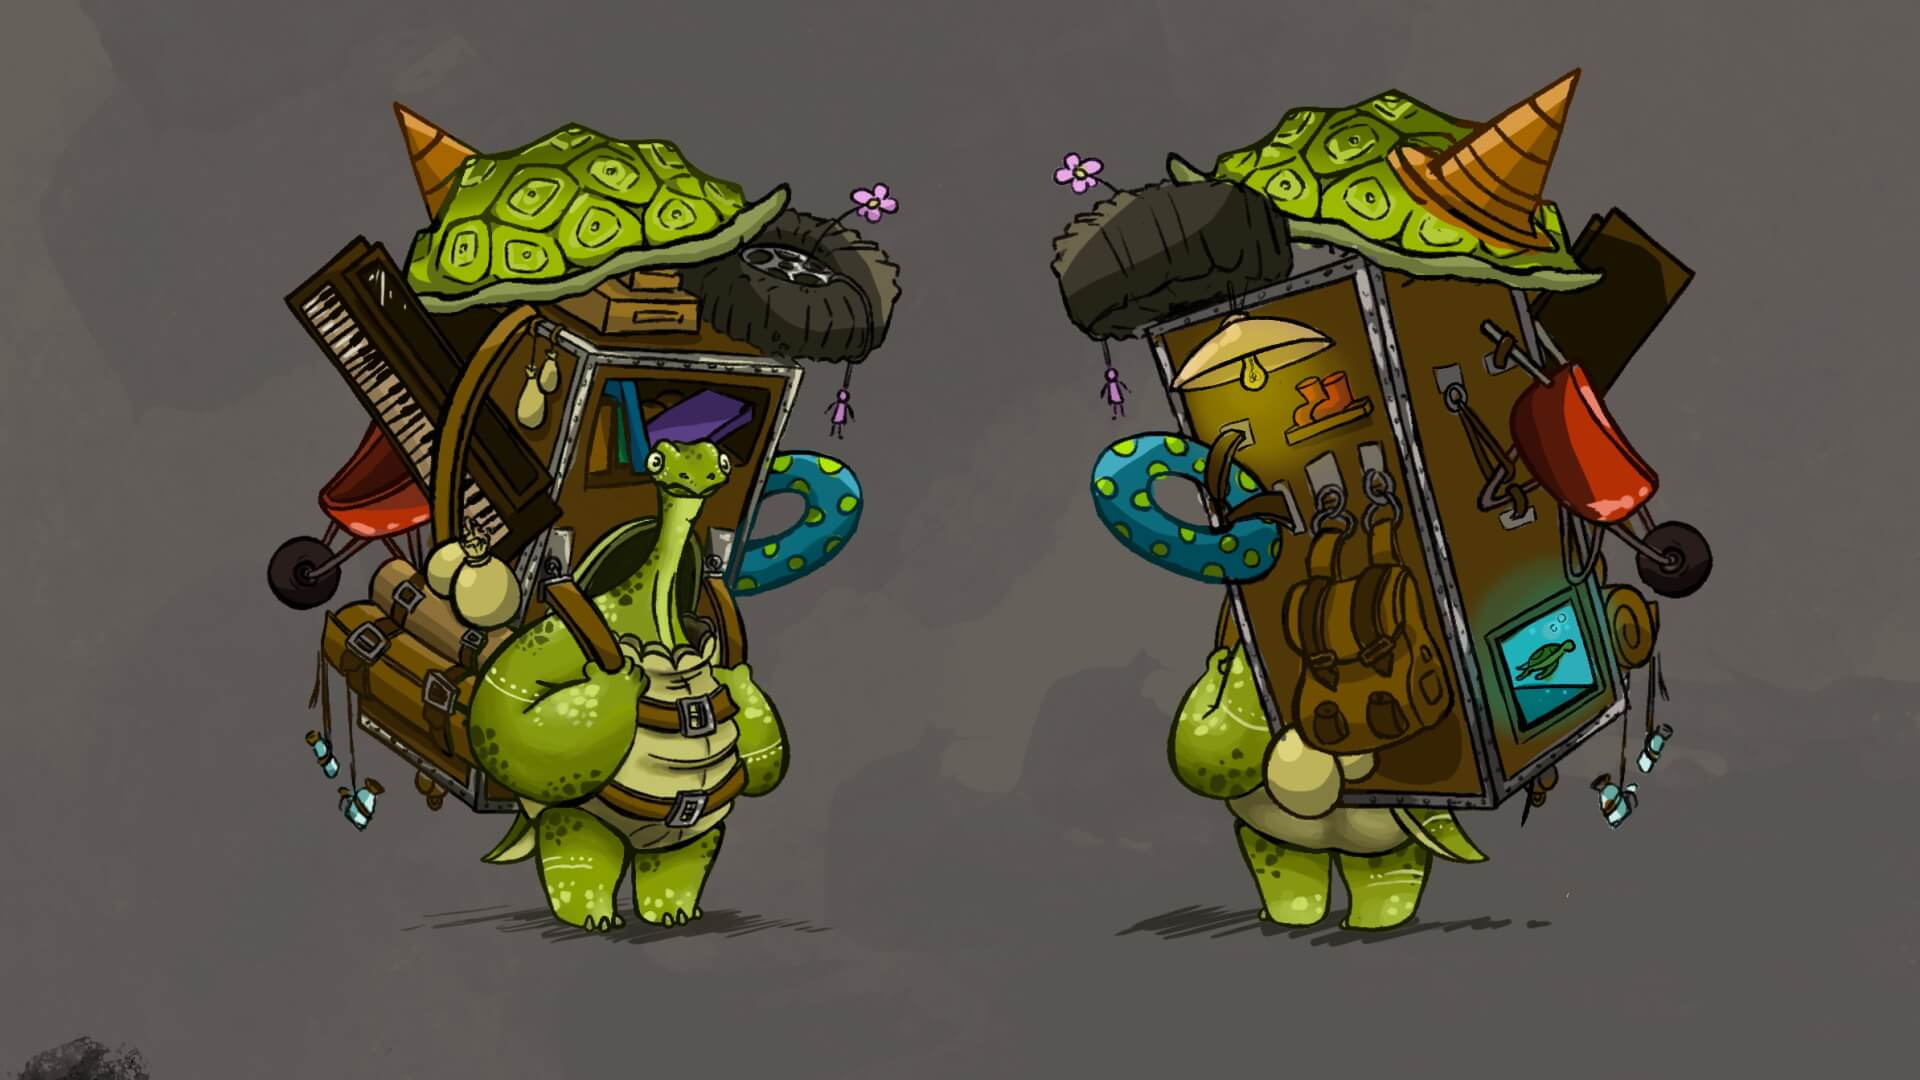 Front and back sketches of a turtle-like character carrying an enormous, detailed backpack filled with various items.